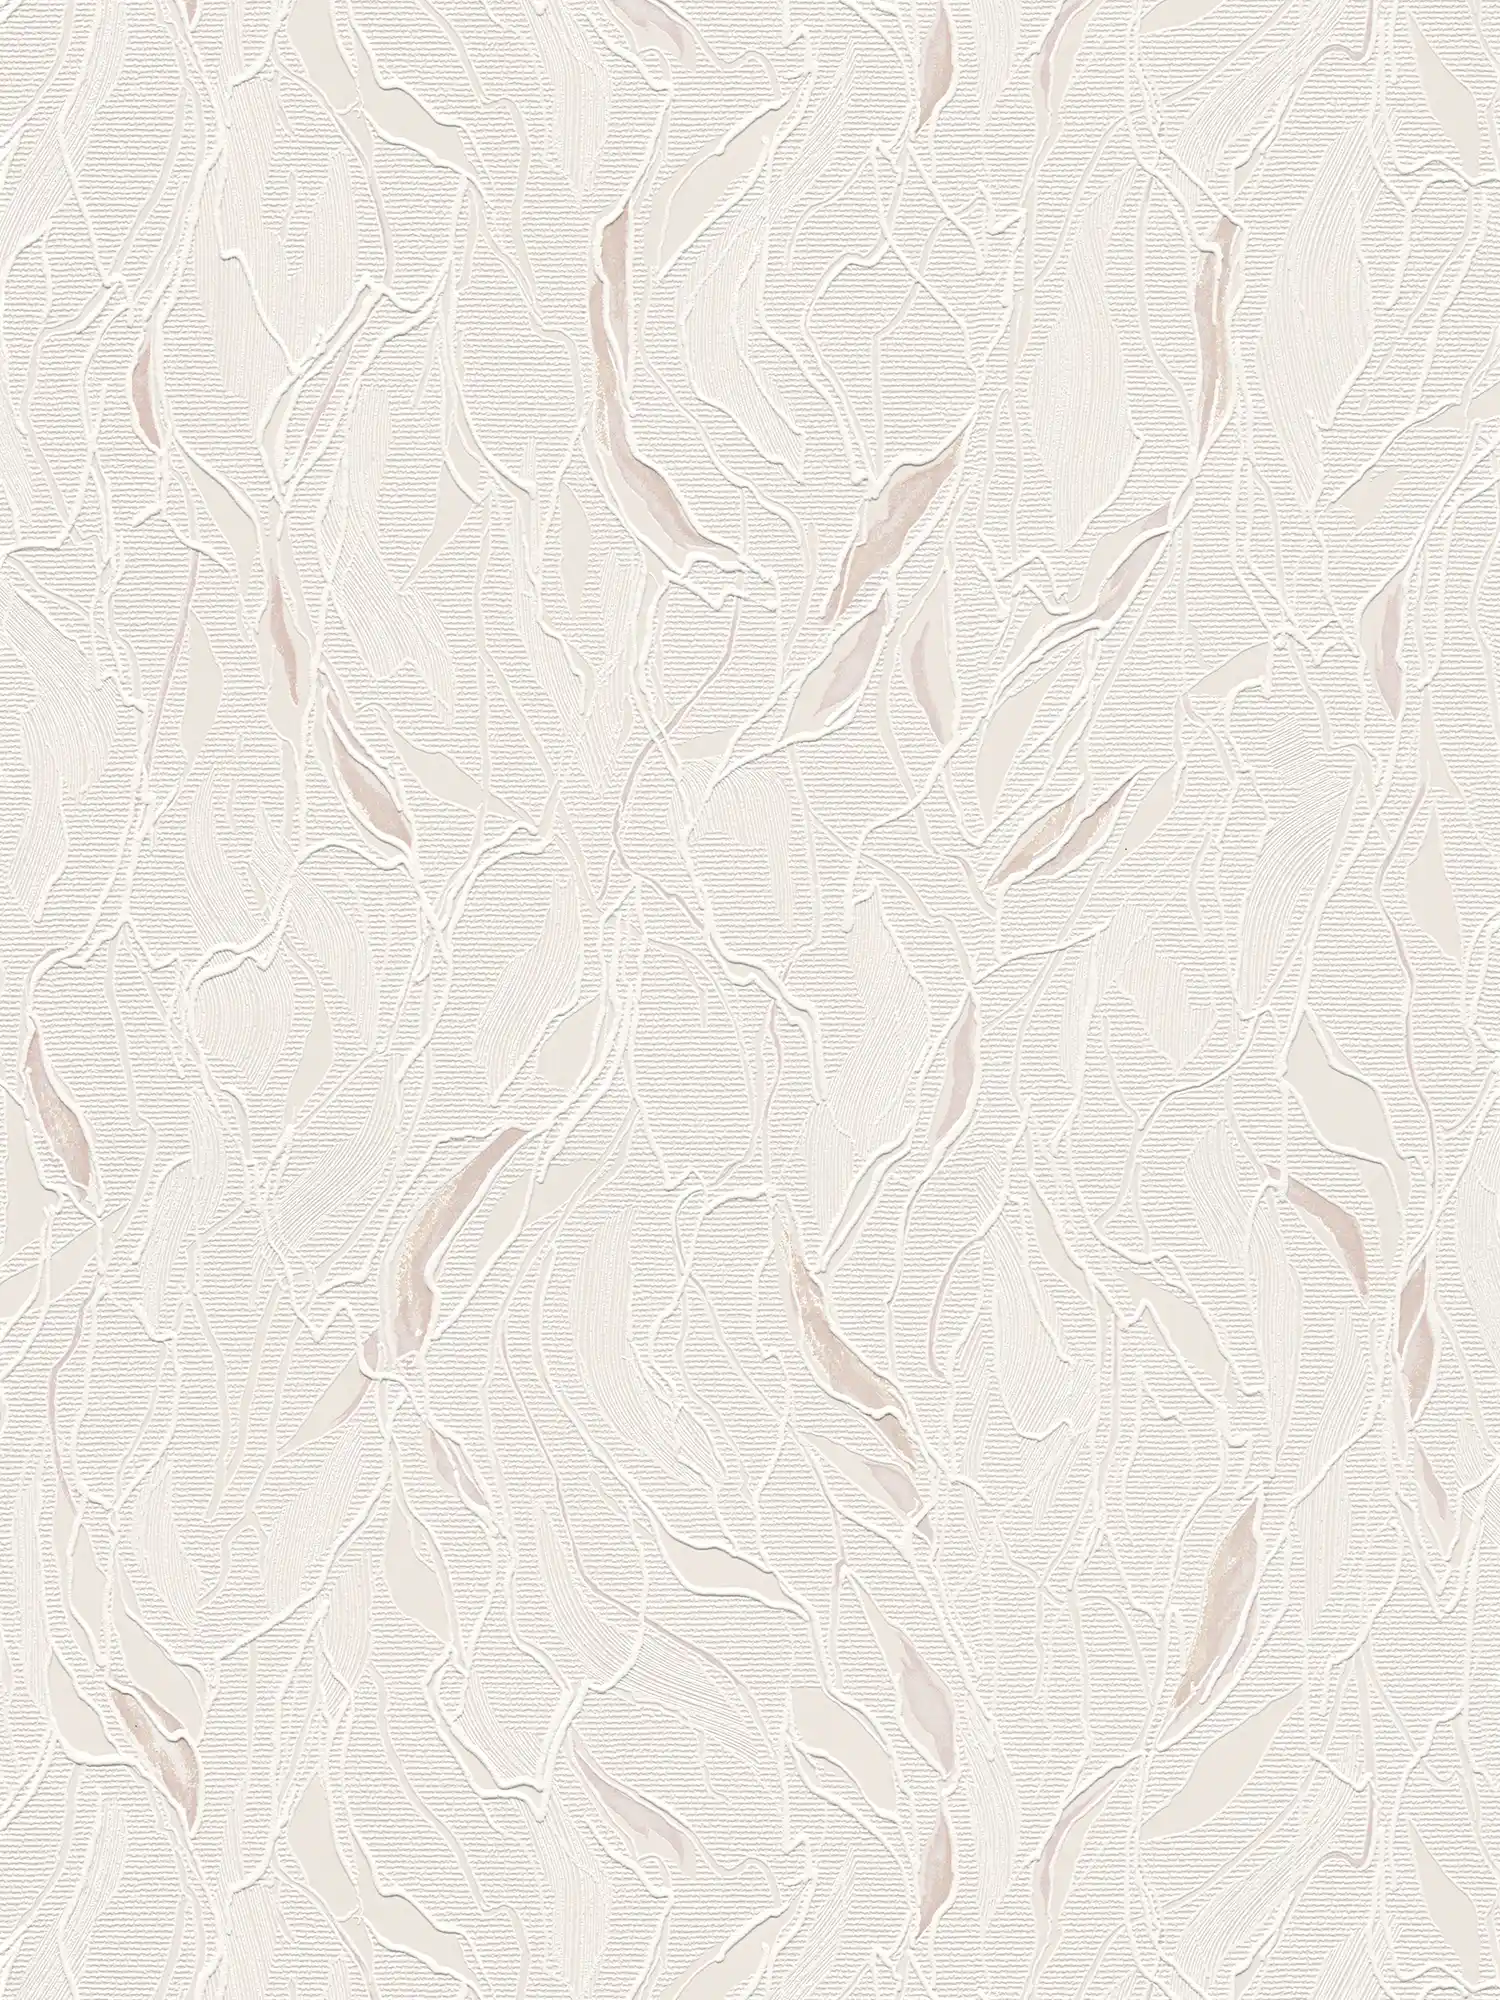 Pattern wallpaper abstract with embossing & foam structure - metallic, white
